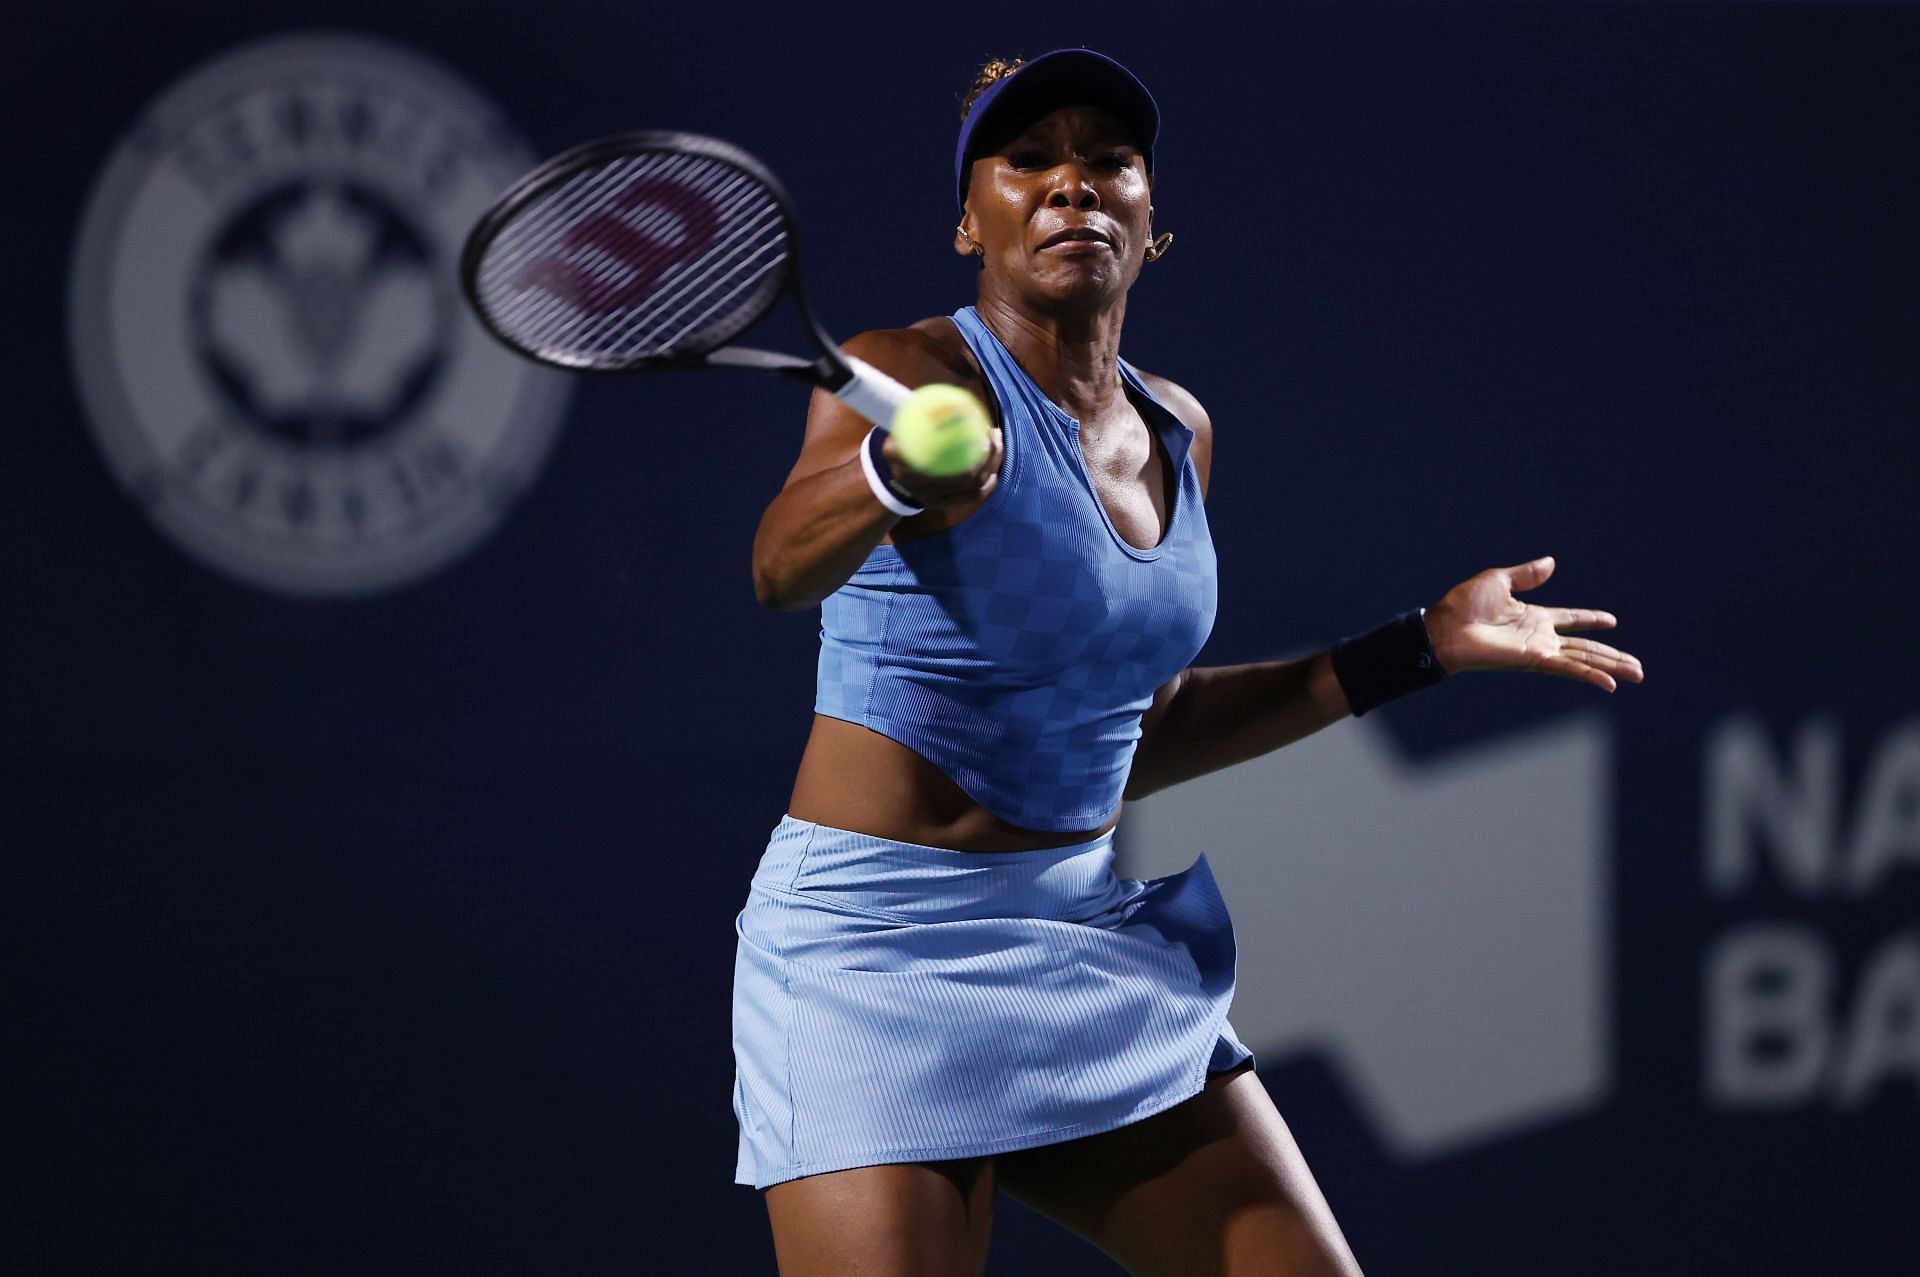 Venus Williams will look to get her first win of the season